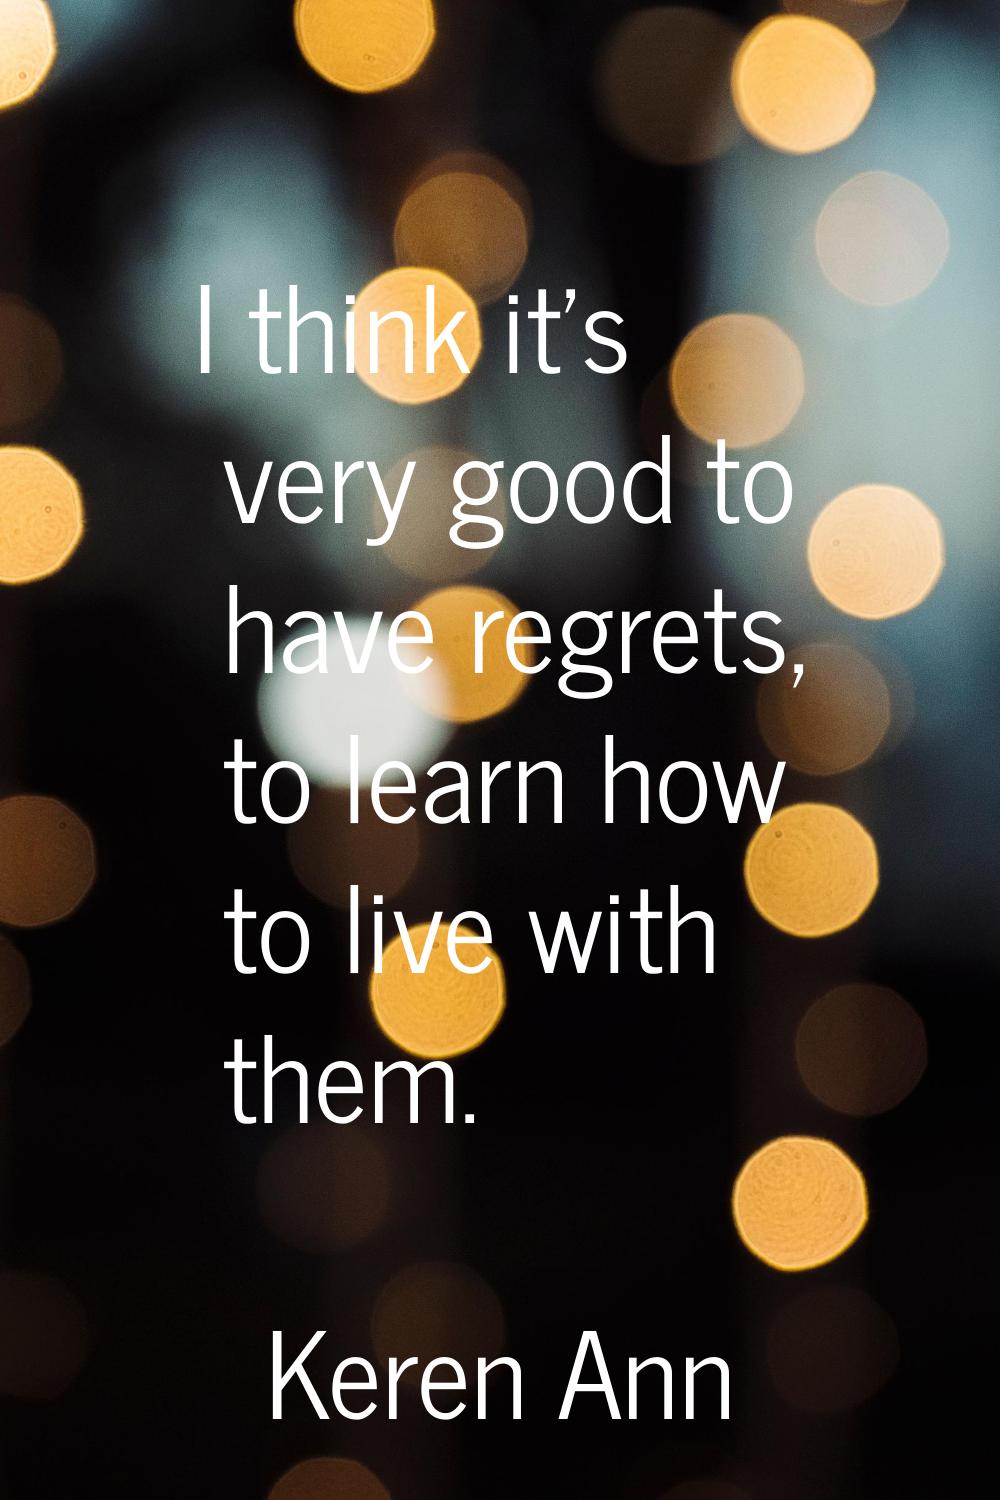 I think it's very good to have regrets, to learn how to live with them.